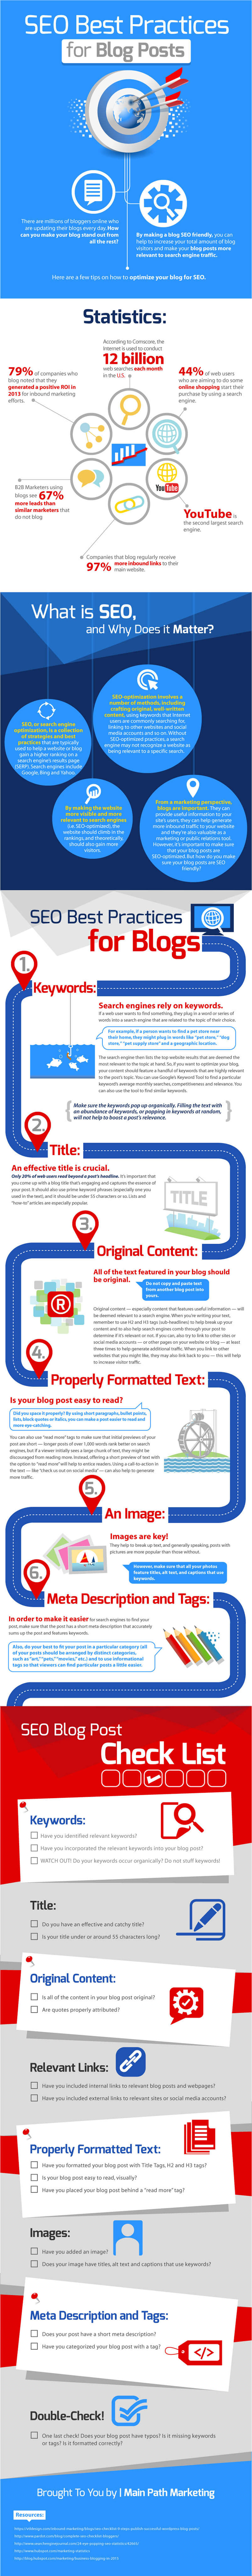 SEO Best Practices for Blog Posts Infographic